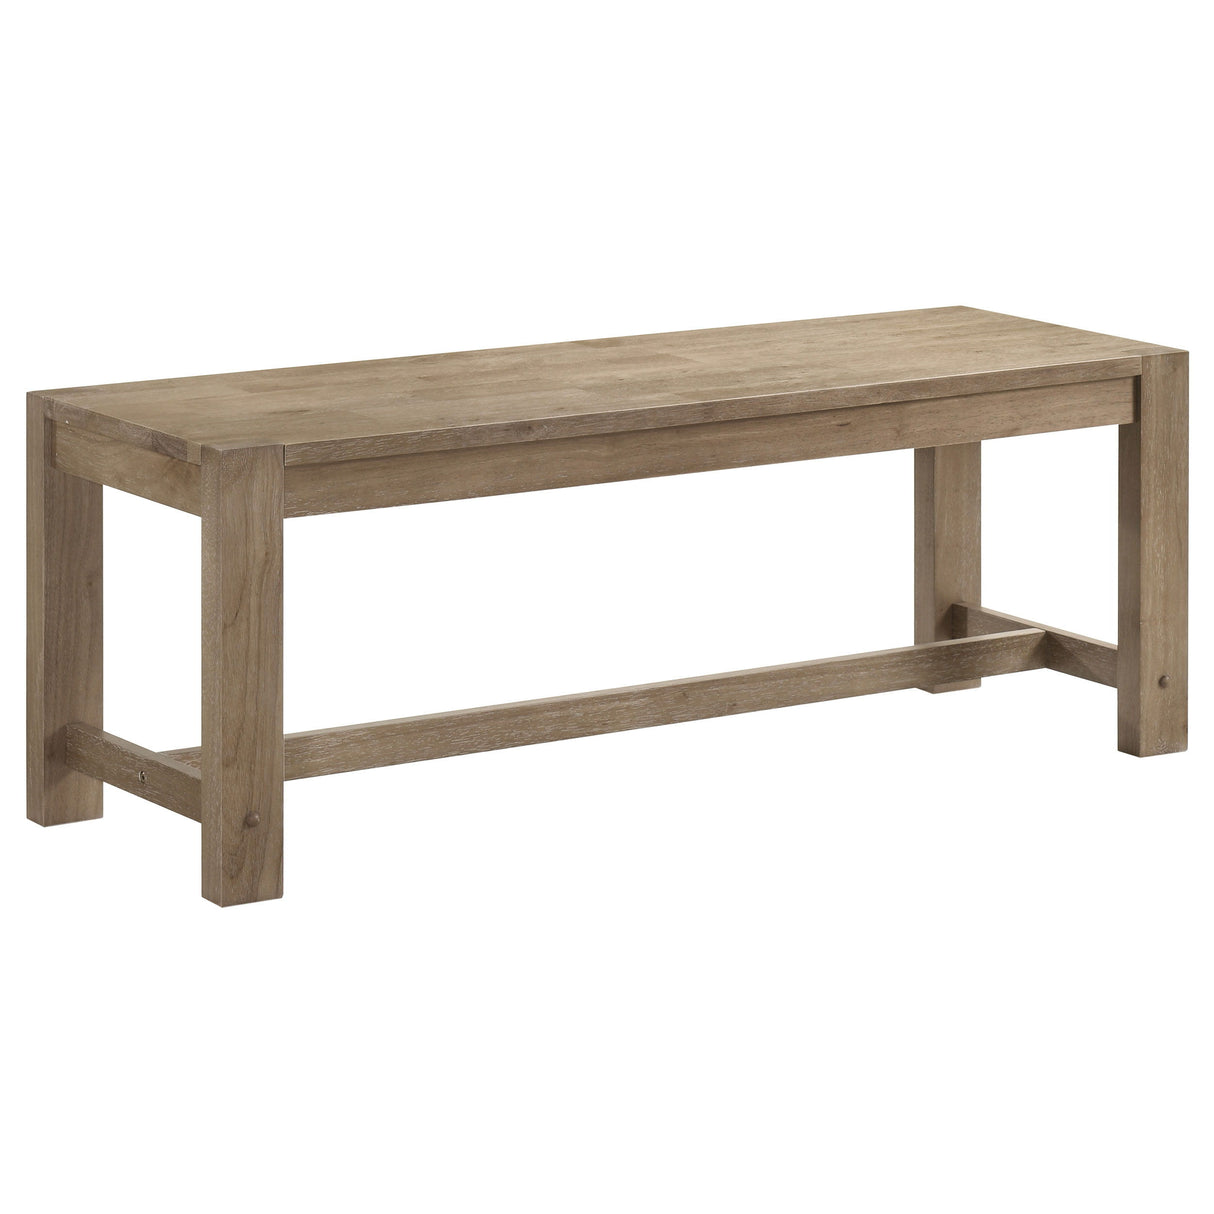 Scottsdale - Solid Wood Dining Bench - Brown Washed